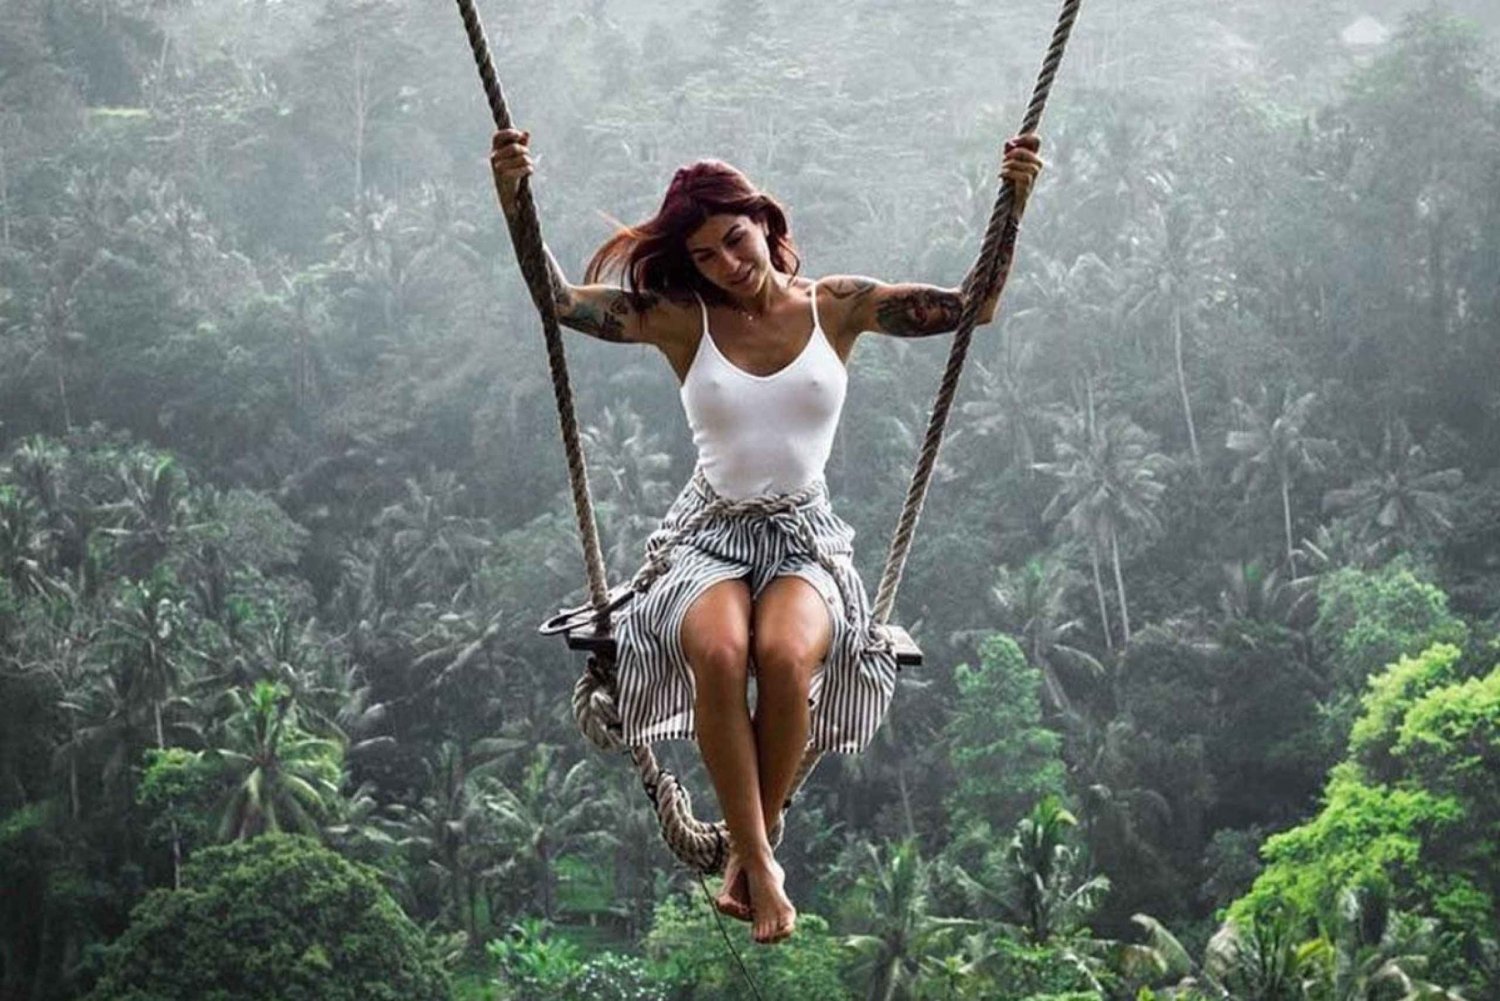 Bali Swing Packages - Jungle Swing and Photo Spot